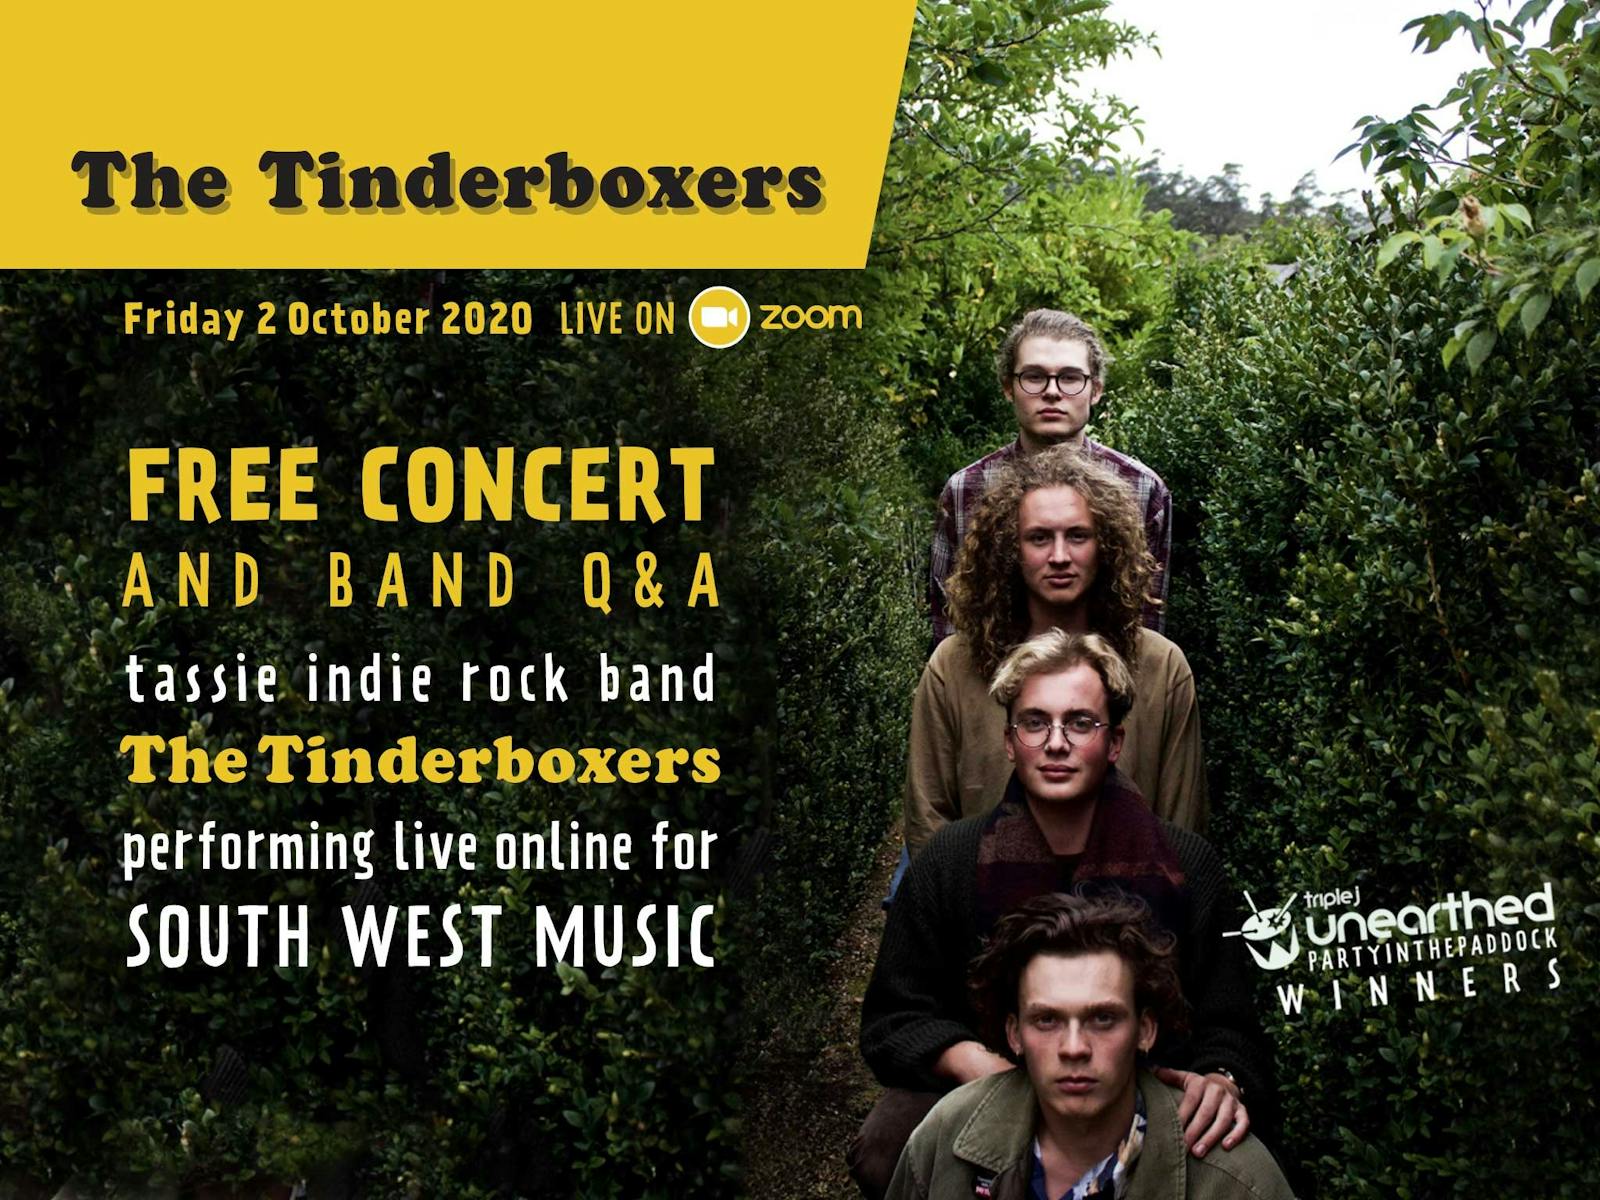 Image for South West Music Livestream Youth Concert - The Tinderboxers